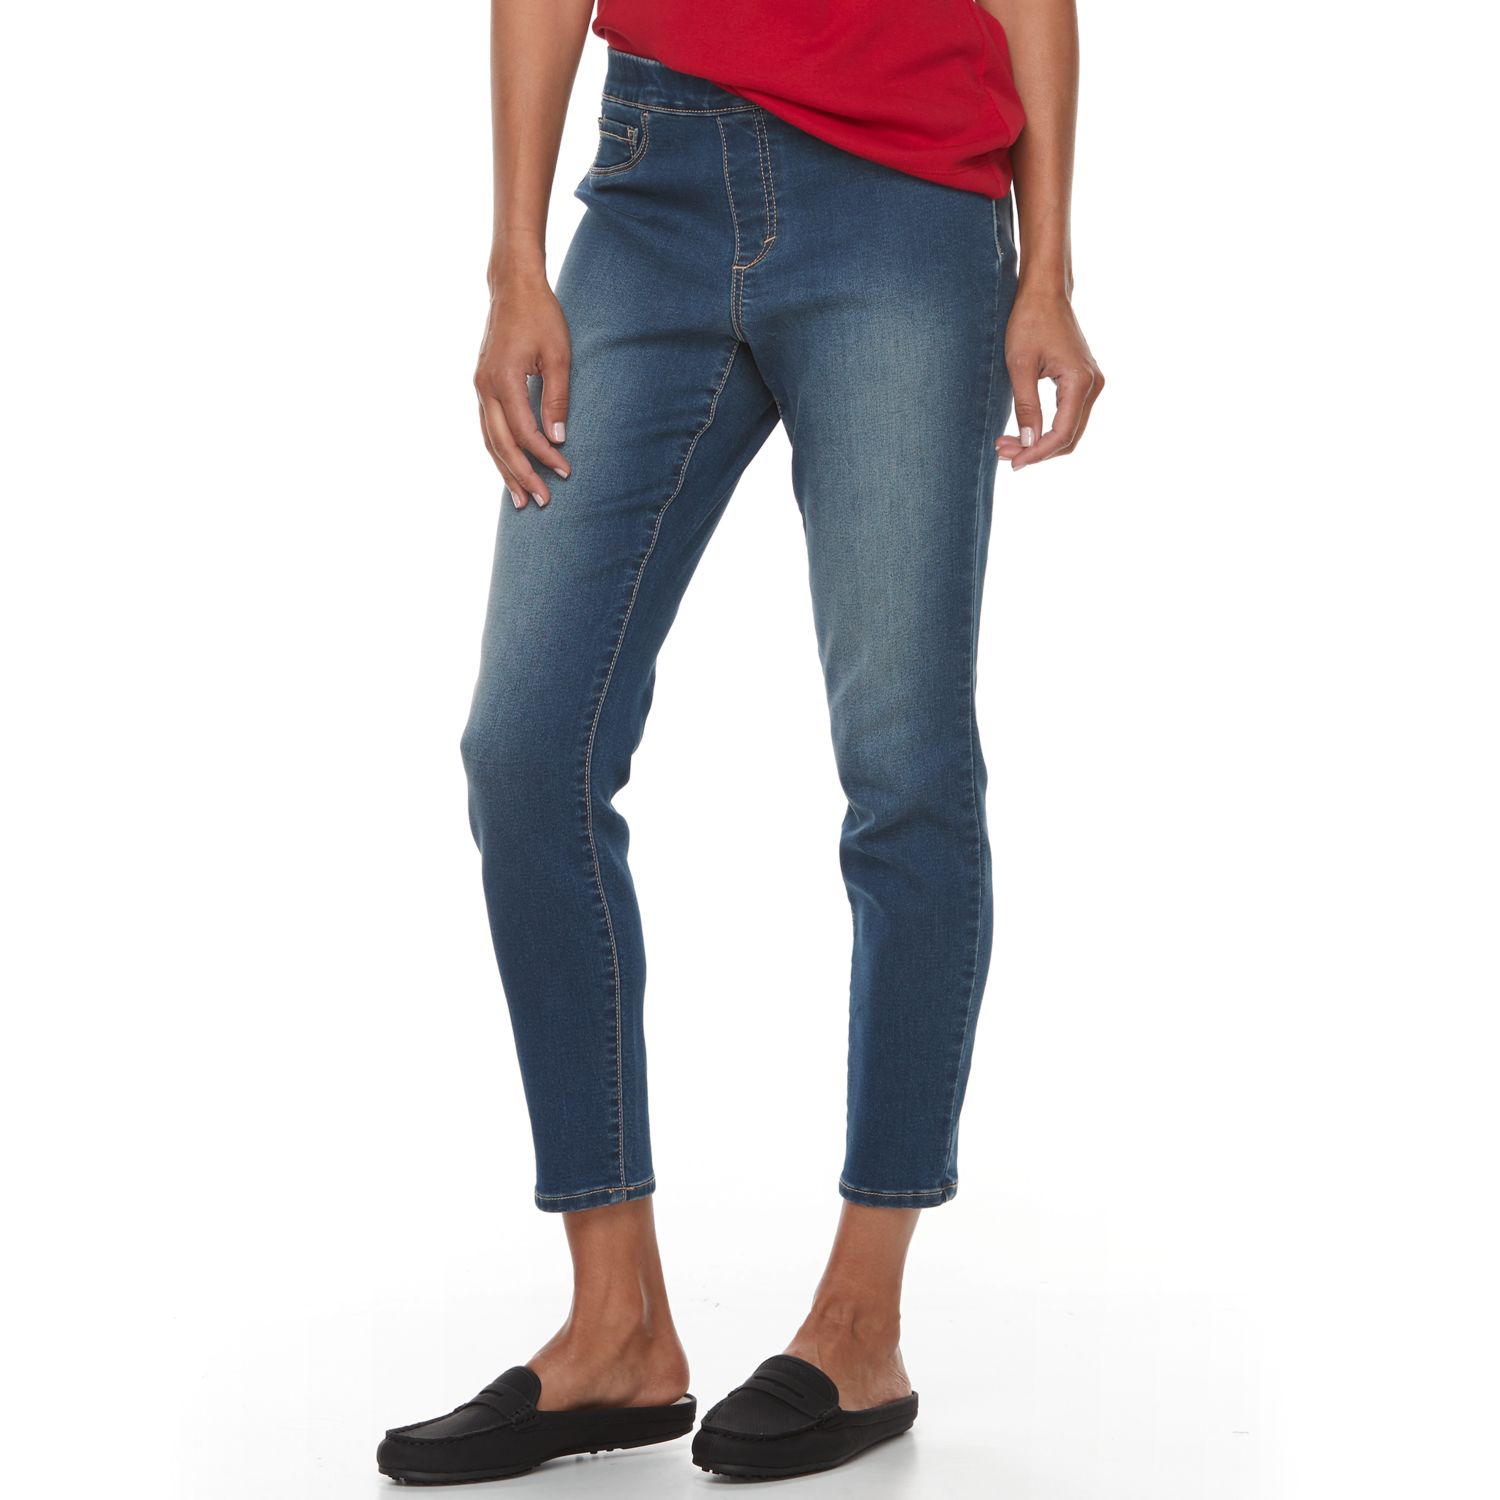 kohl's croft and barrow pull on jeans